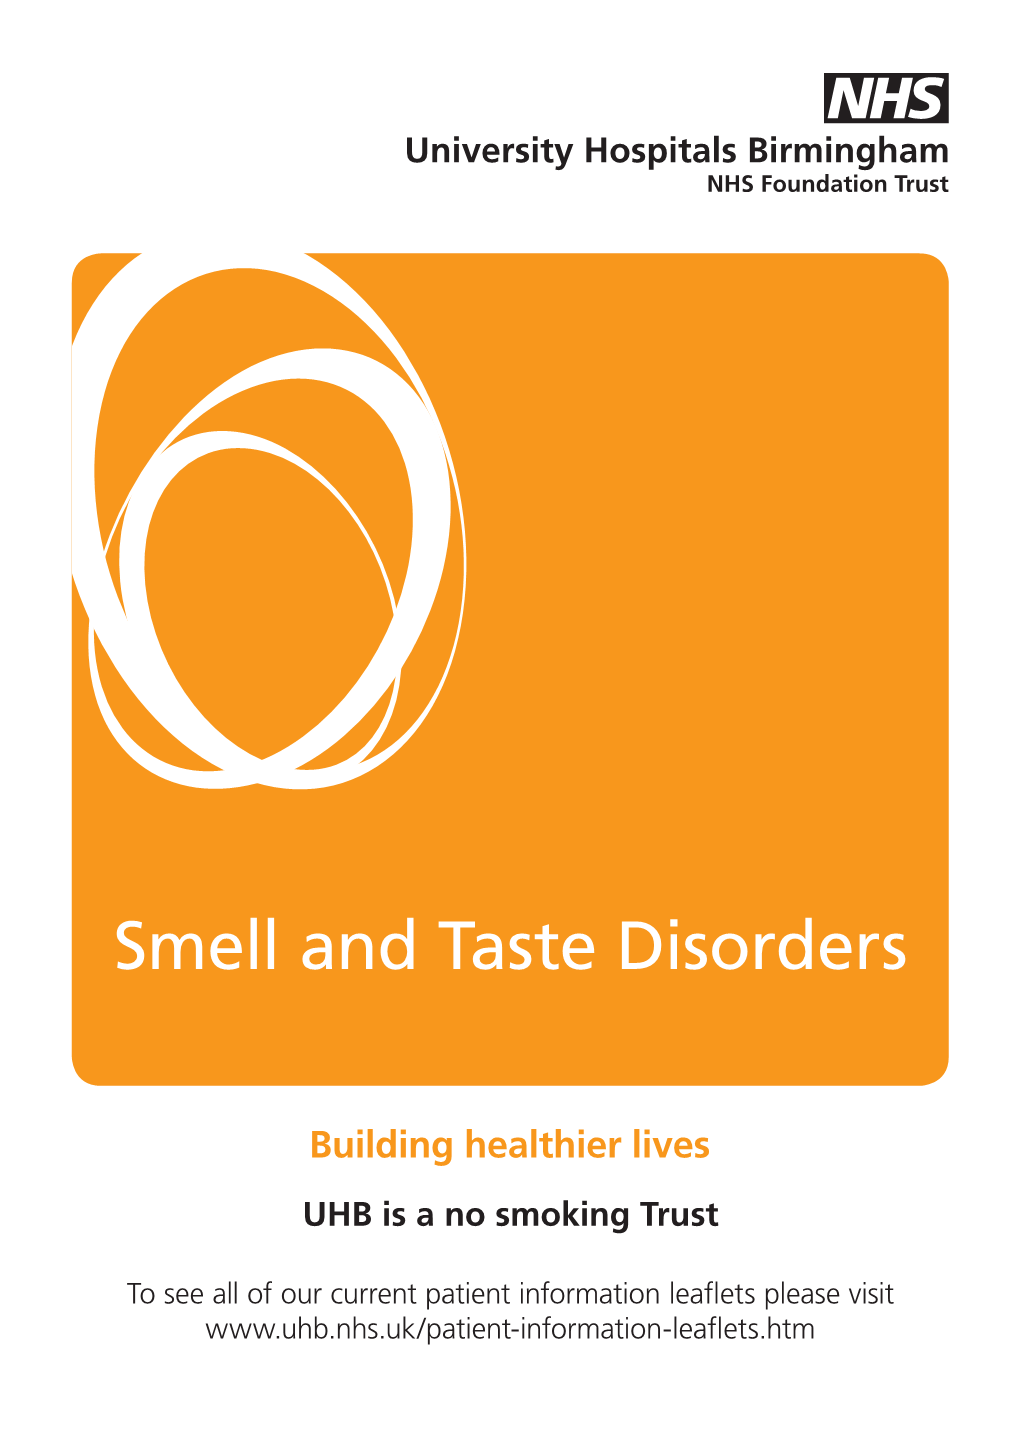 Smell and Taste Disorders